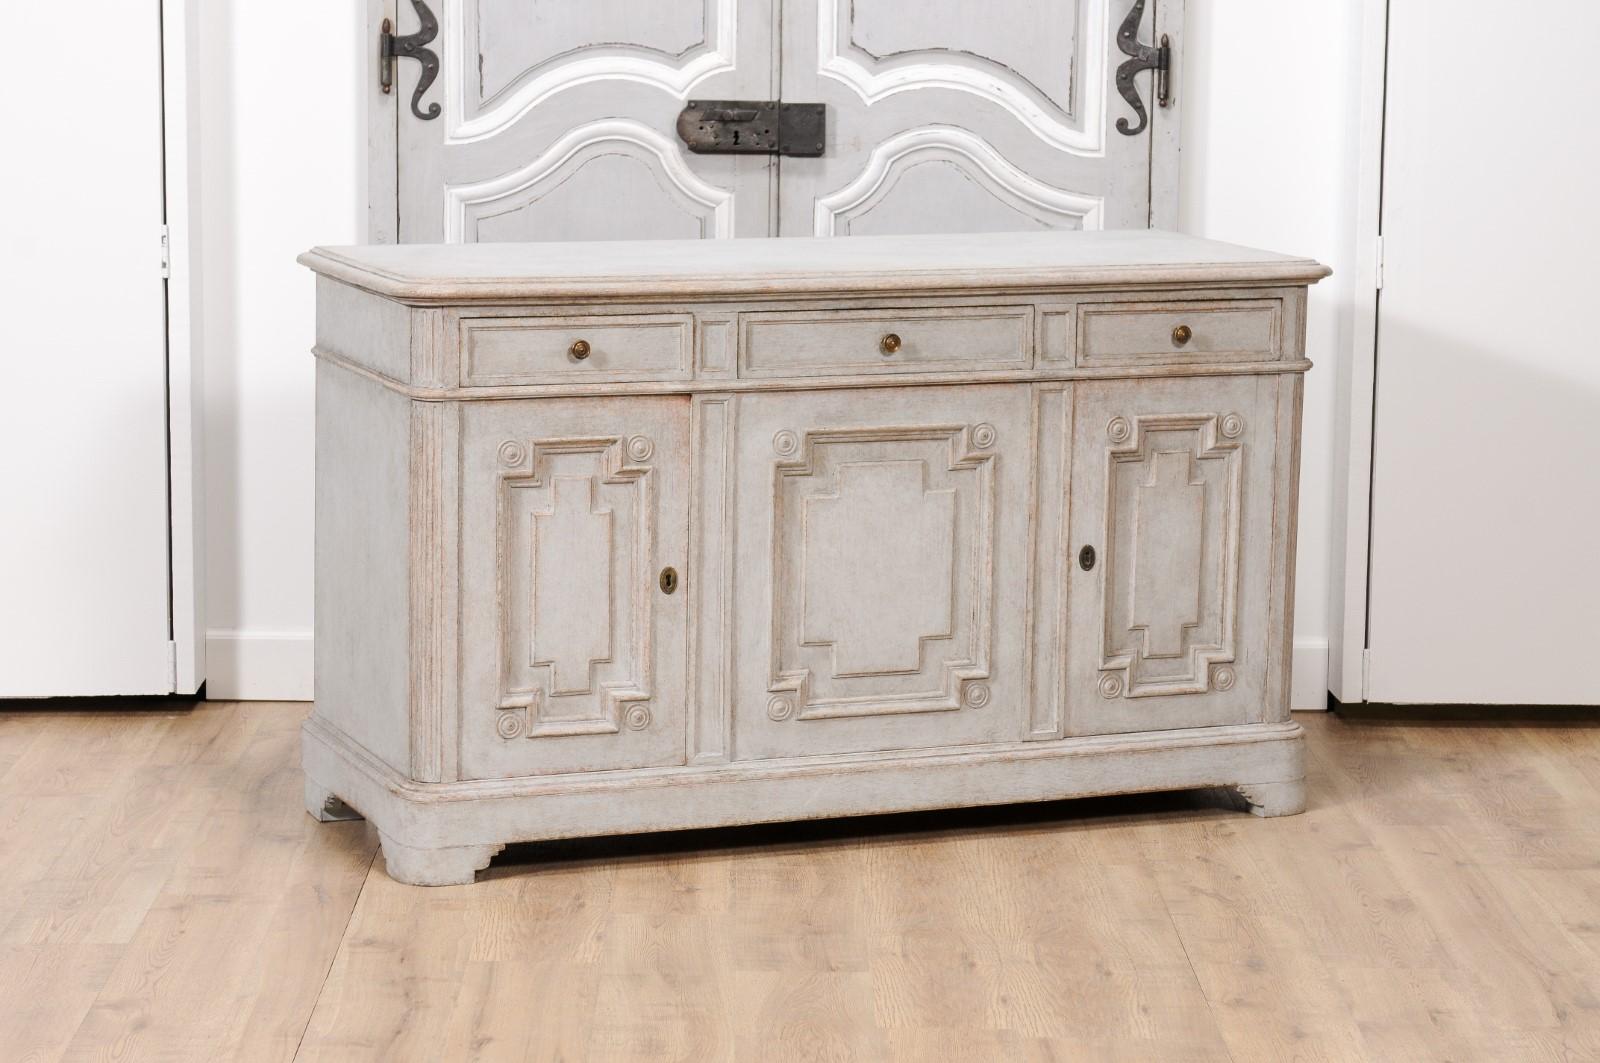 A Swedish Gustavian style painted wood sideboard from circa 1890 with three drawers over three doors, fluted side posts, carved bracket feet and carved geometric motifs. Imbued with the timeless elegance of Swedish Gustavian design, this painted